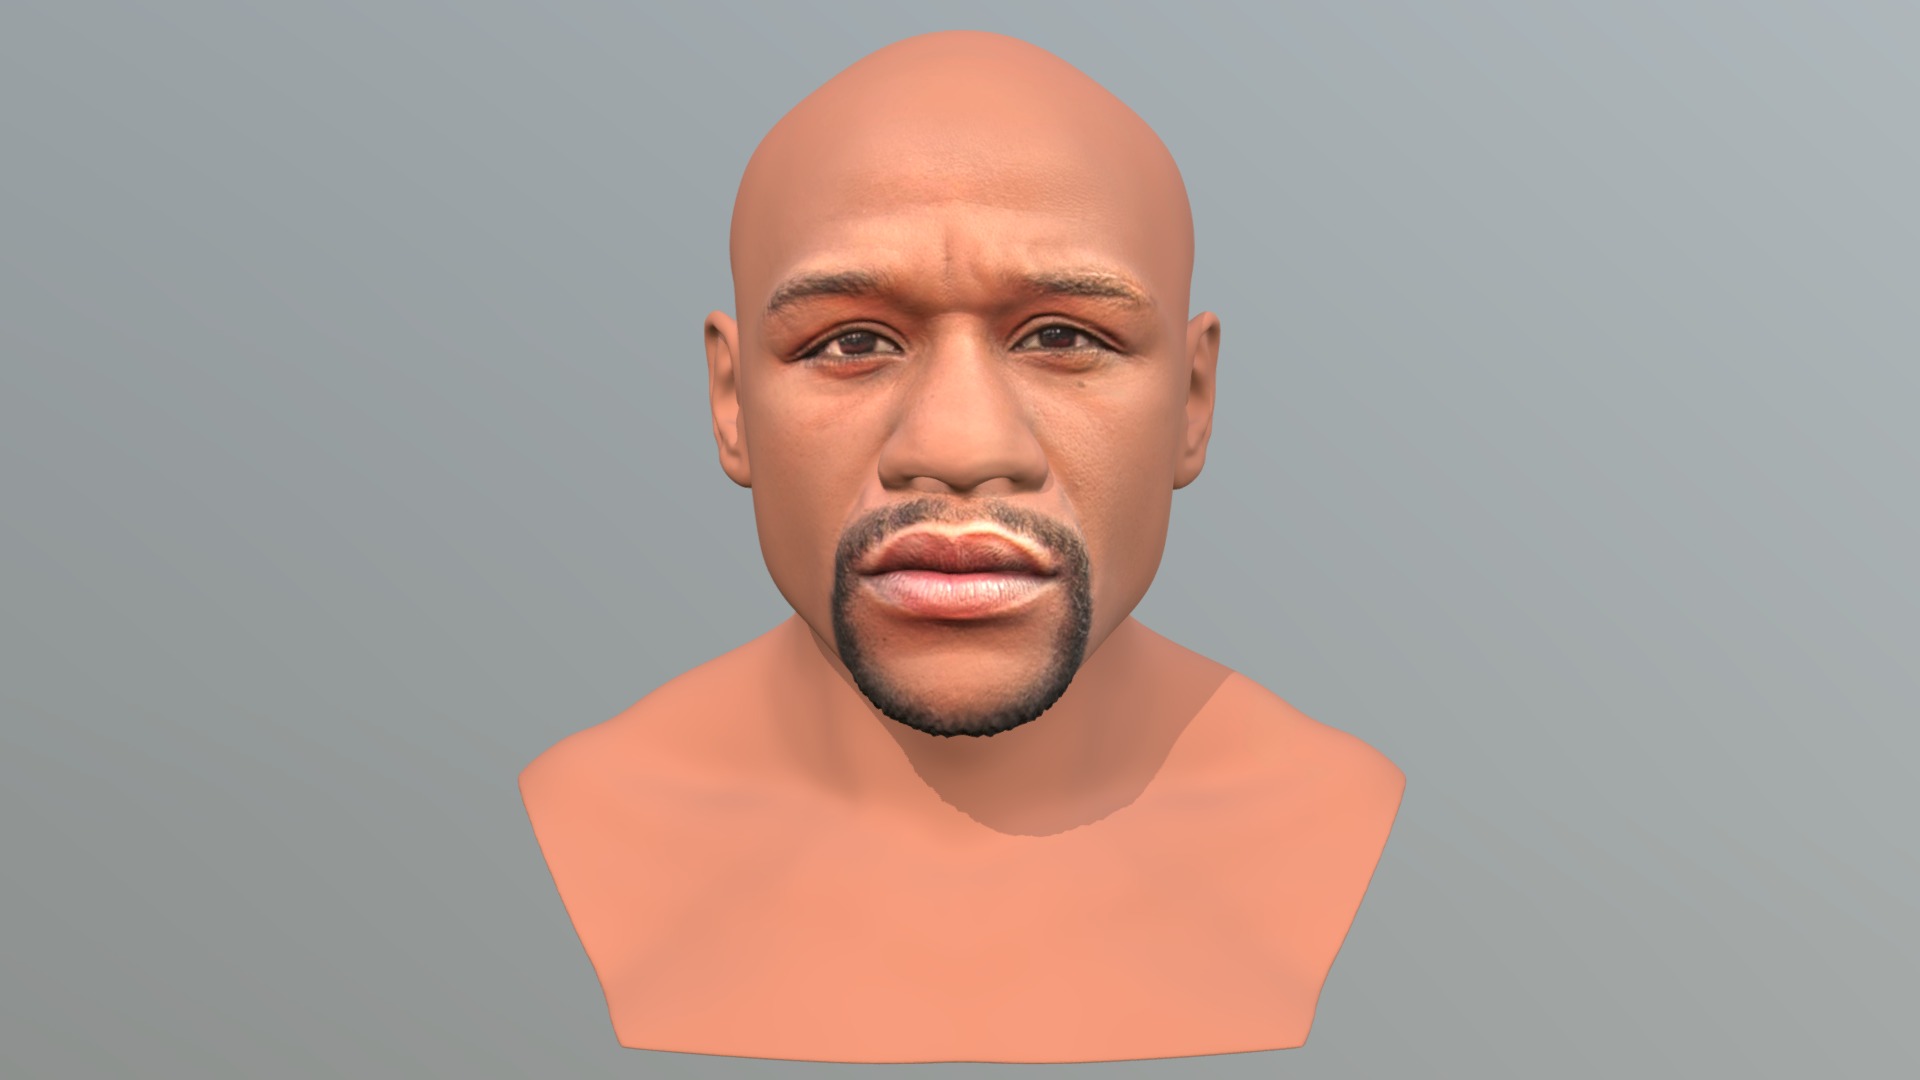 3D model Floyd Mayweather bust for full color 3D printing - This is a 3D model of the Floyd Mayweather bust for full color 3D printing. The 3D model is about a man with a beard.